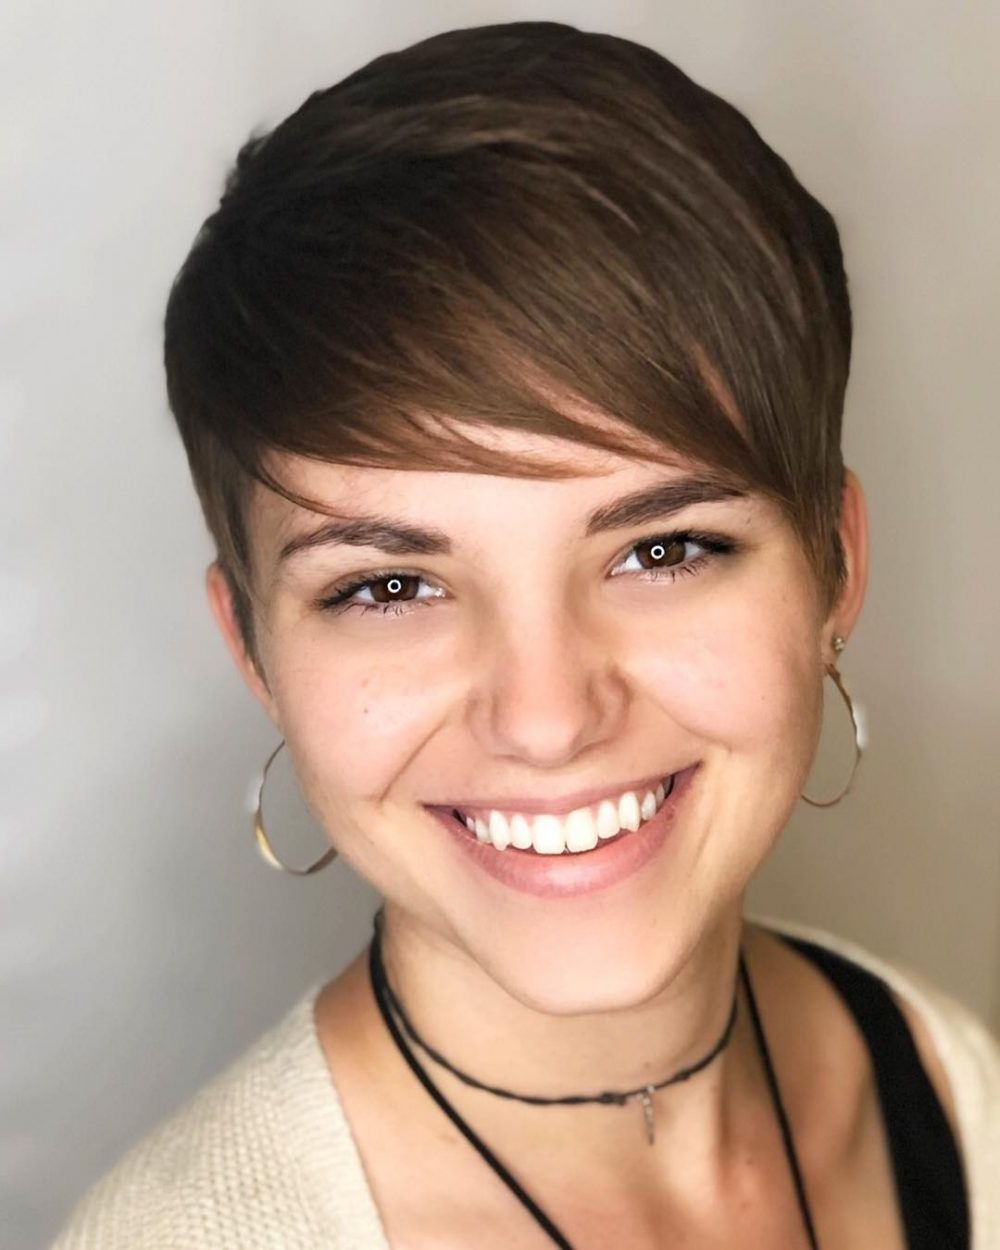 33 Flattering Short Hairstyles For Round Faces In 2018 With Regard To Pictures Of Short Hairstyles For Round Faces (Photo 4 of 25)